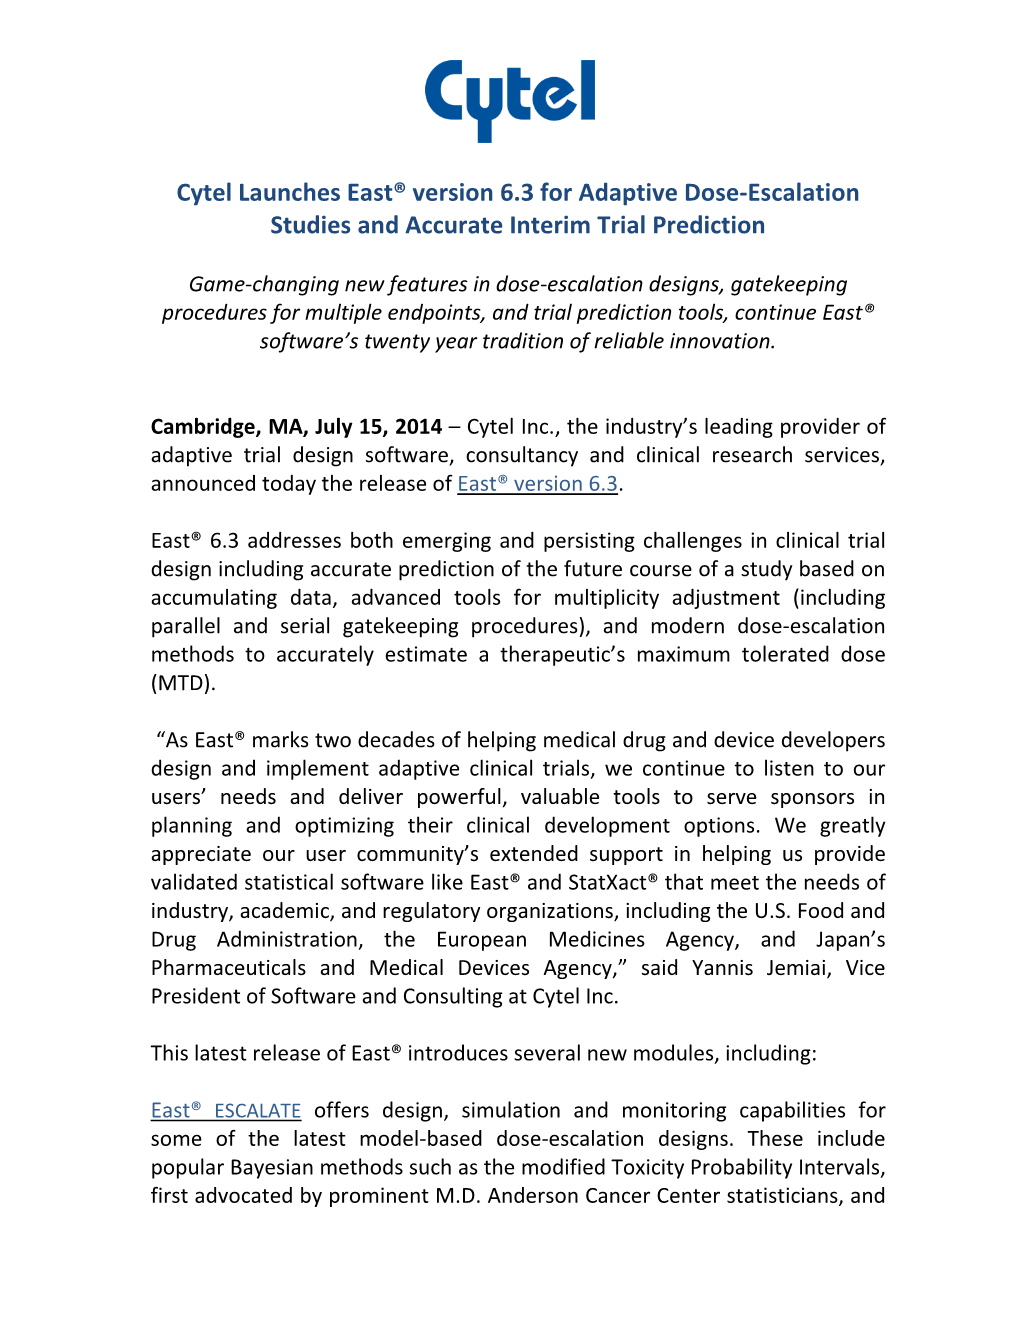 Cytel Launches East® Version 6.3 for Adaptive Dose-Escalation Studies and Accurate Interim Trial Prediction